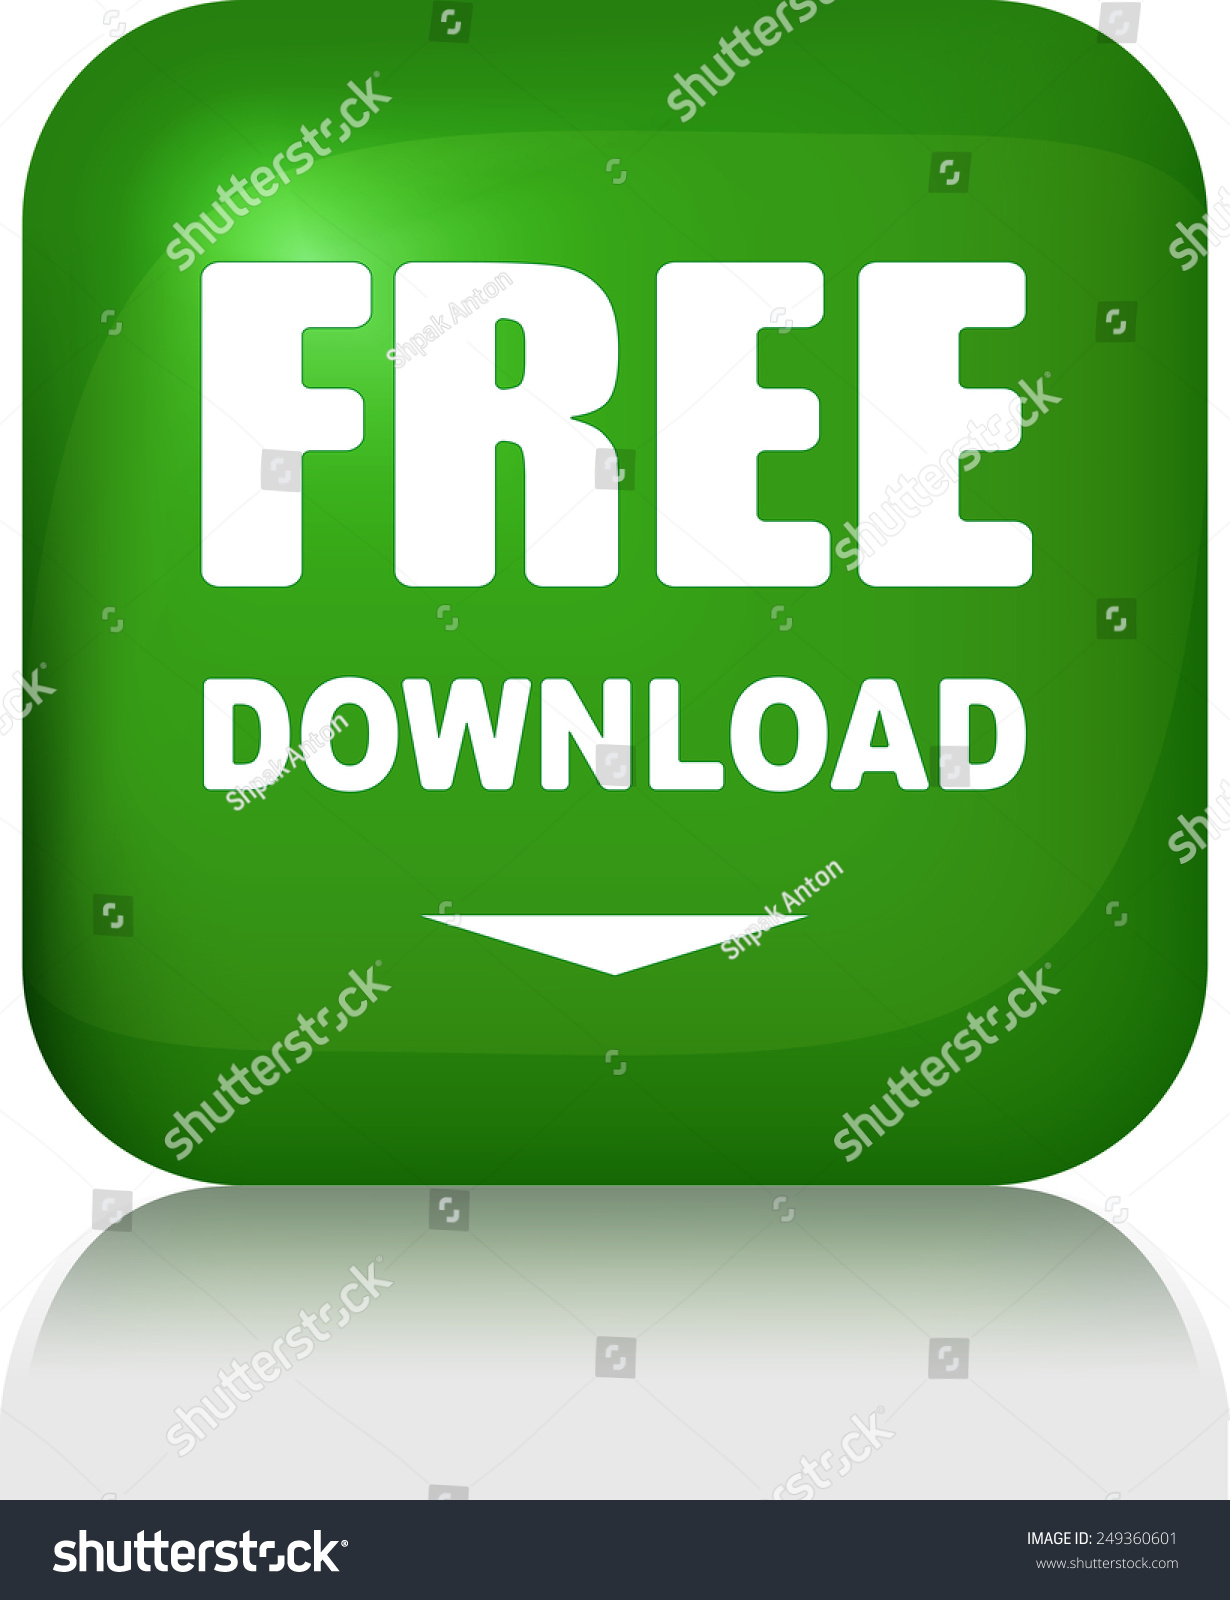 vector free download button - photo #48